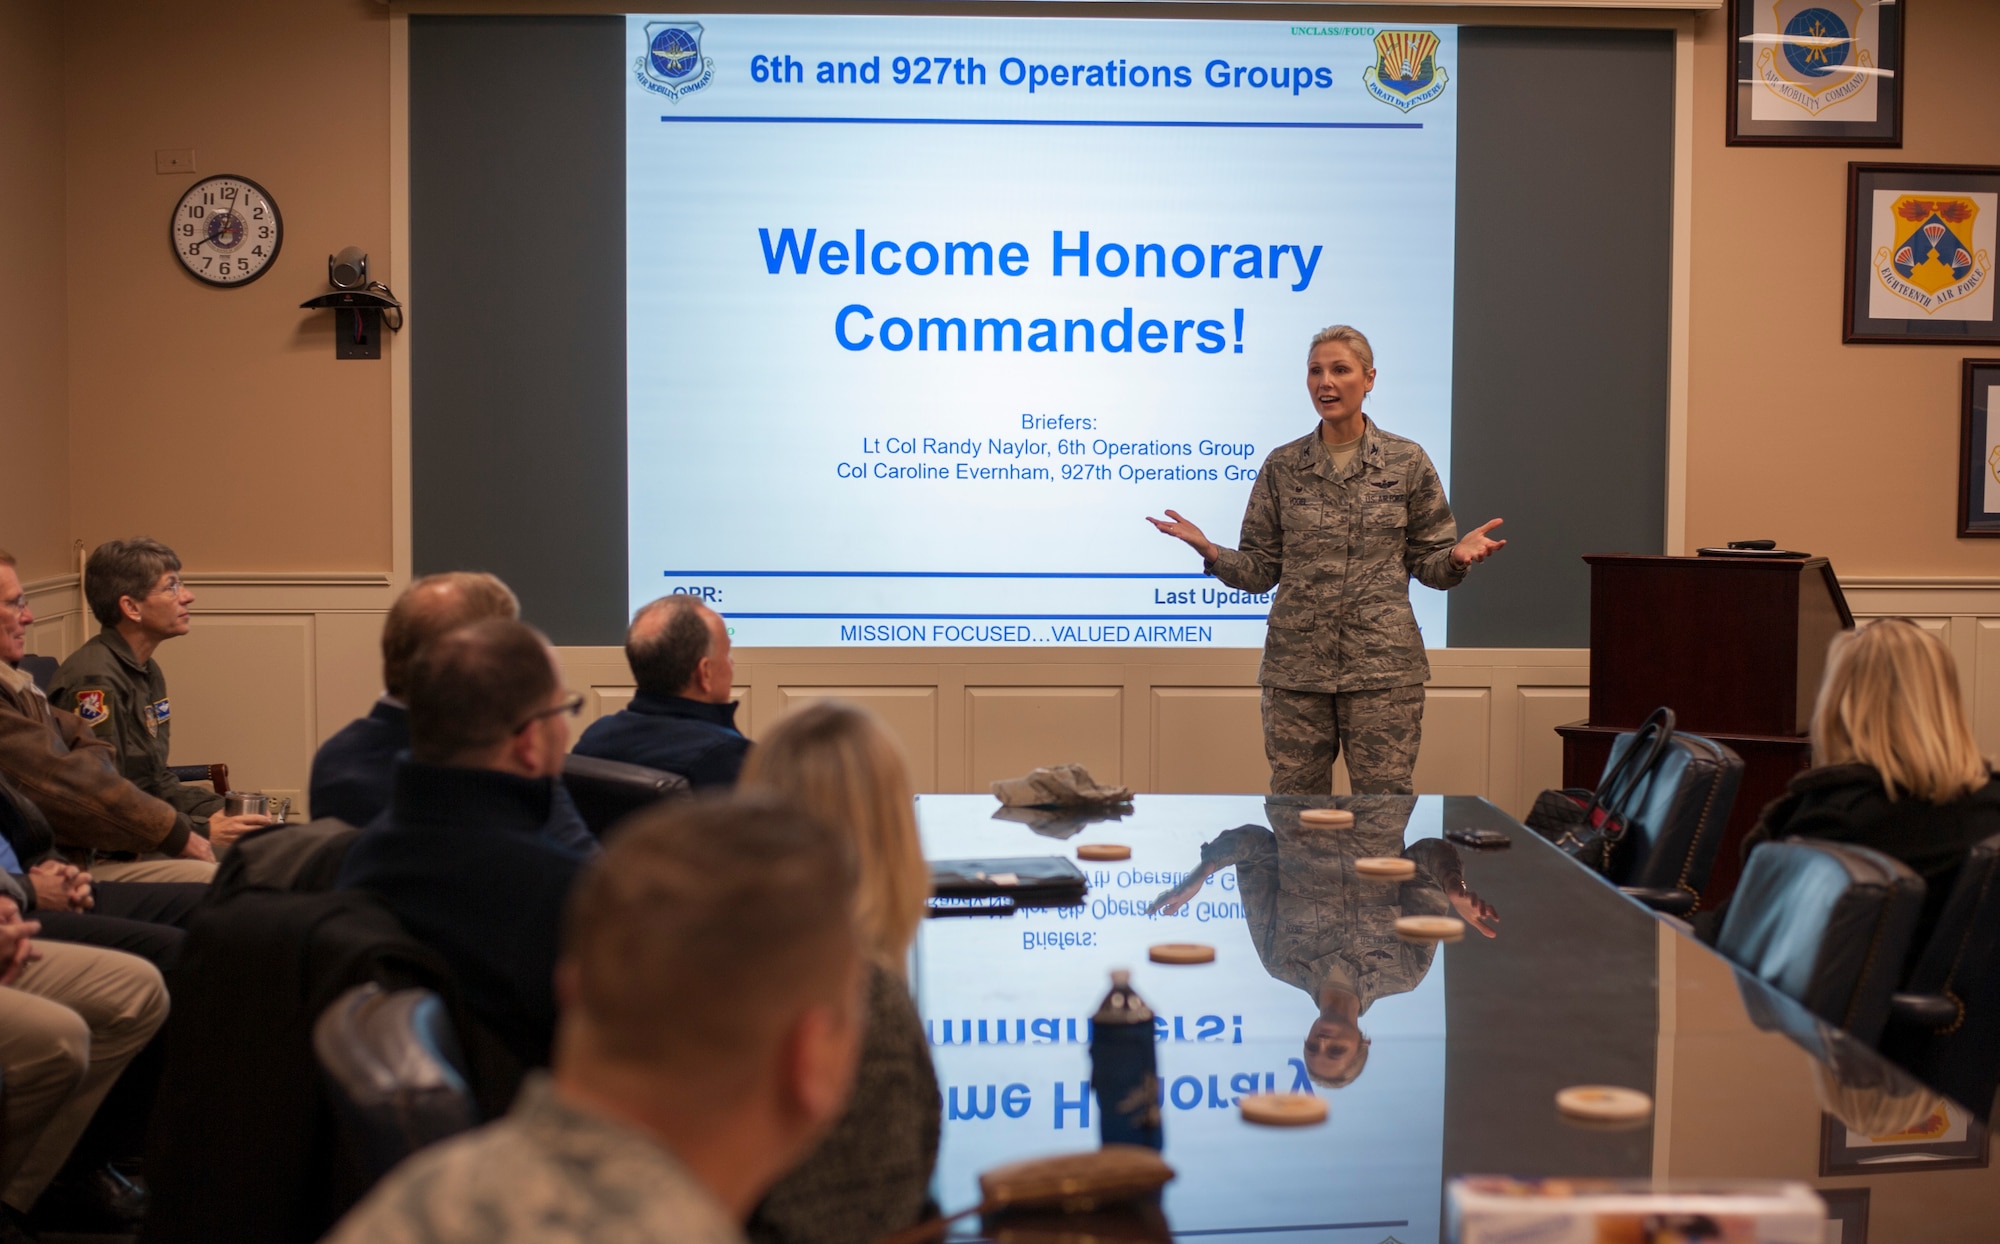 U.S. Air Force Col. April Vogel, the commander of the 6th Air Mobility Wing, welcomes a group of honorary commanders during an immersion tour at MacDill Air Force Base, Fla., Jan. 18, 2018.